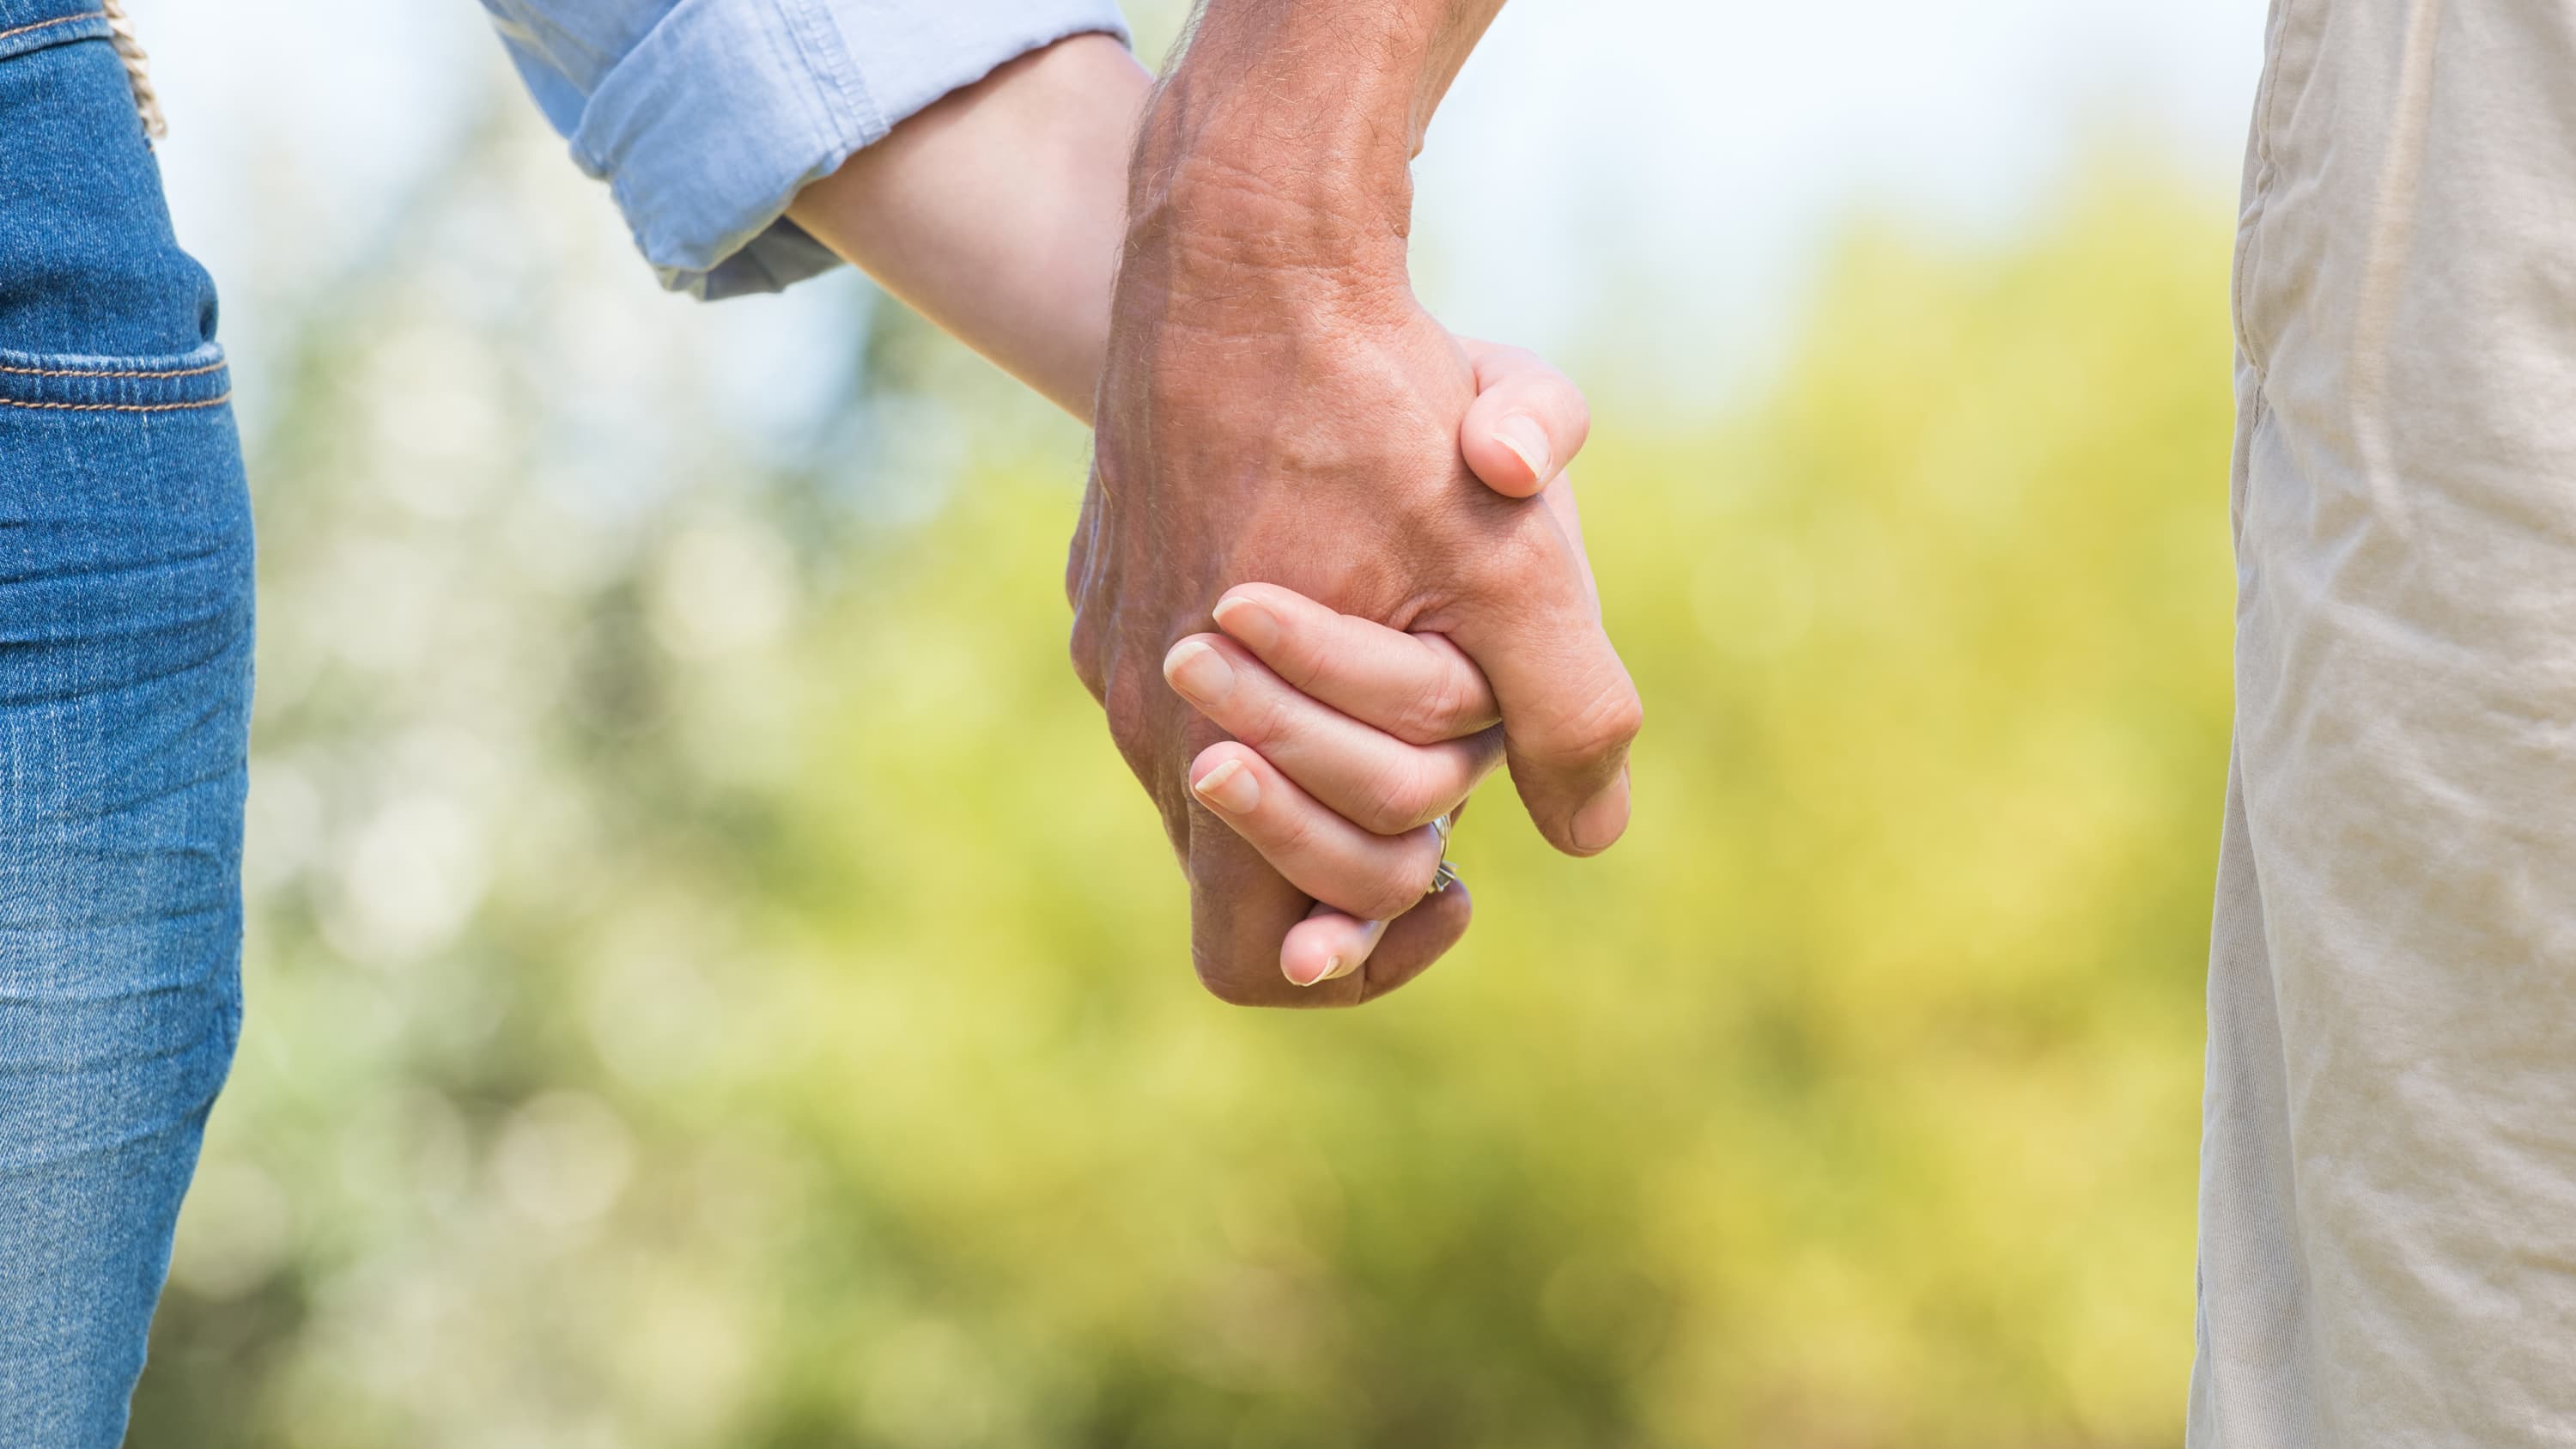 A close up image of two people holding hands, just the hands, in hopes of avoiding a sexually transmitted infection.